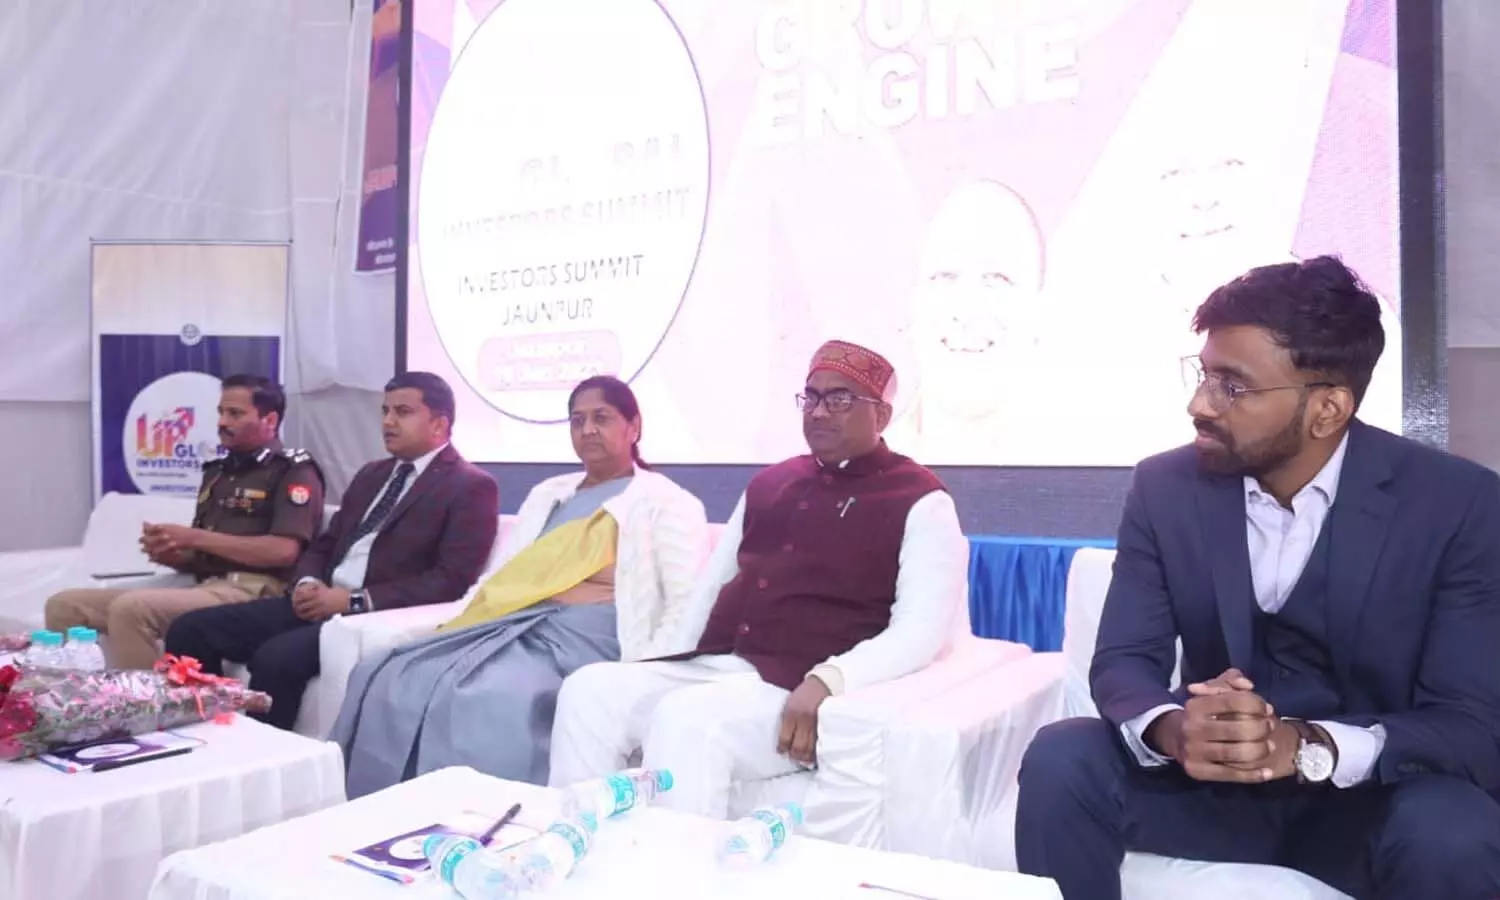 The Minister of State said at the Global Investors Summit in Jaunpur that it is full of natural resources